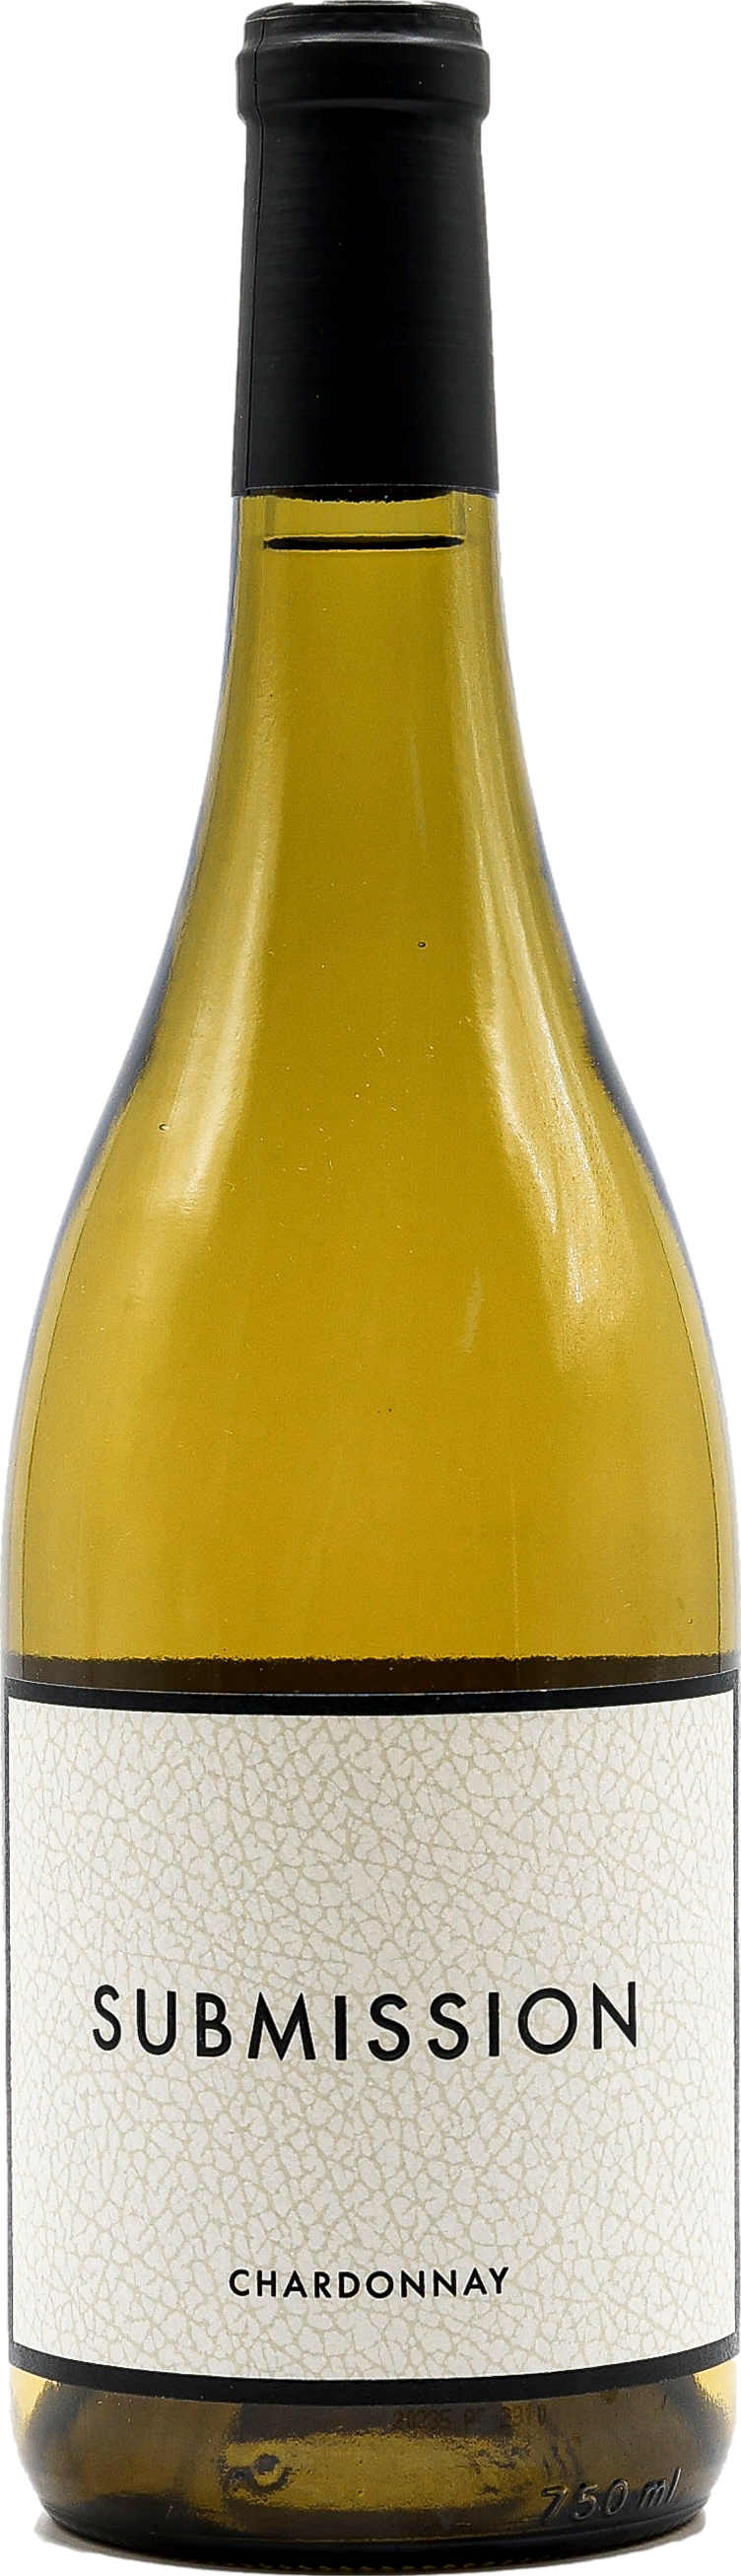 689 Cellars Submission Chardonnay 2020 689 Cellars 8wines DACH